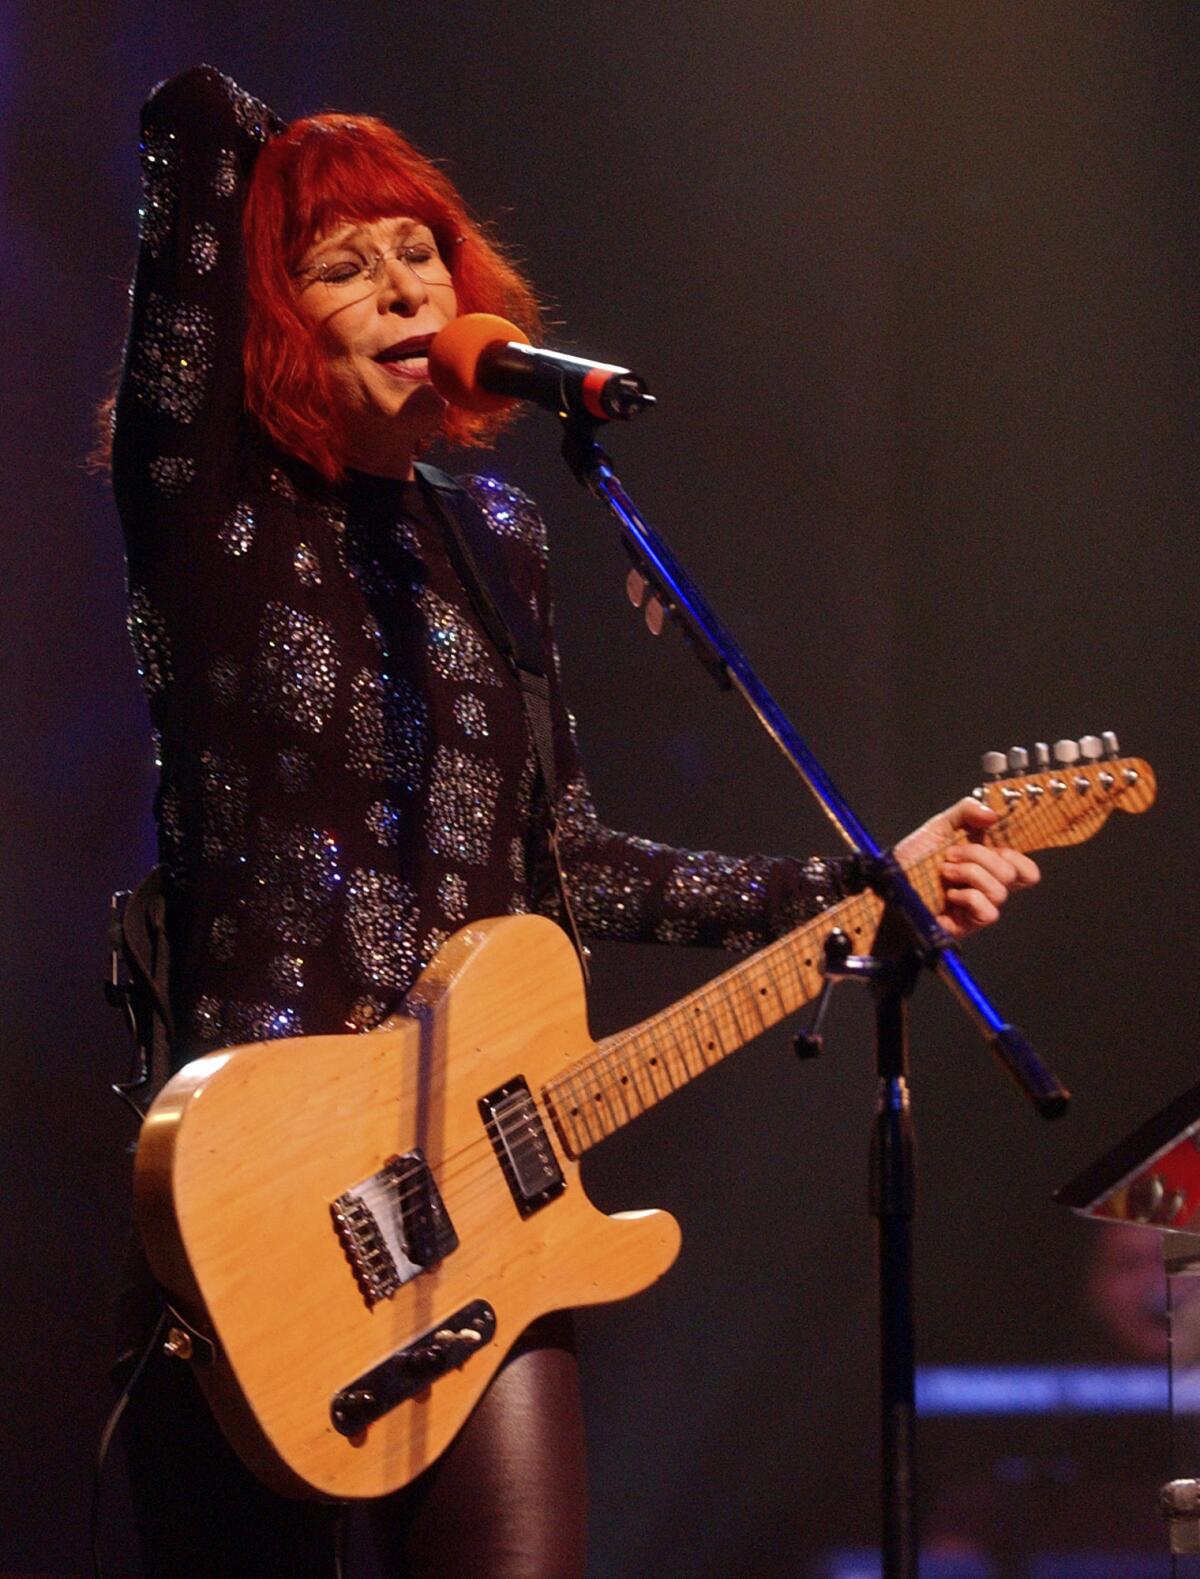 Rita Lee sings into a microphone while playing the guitar